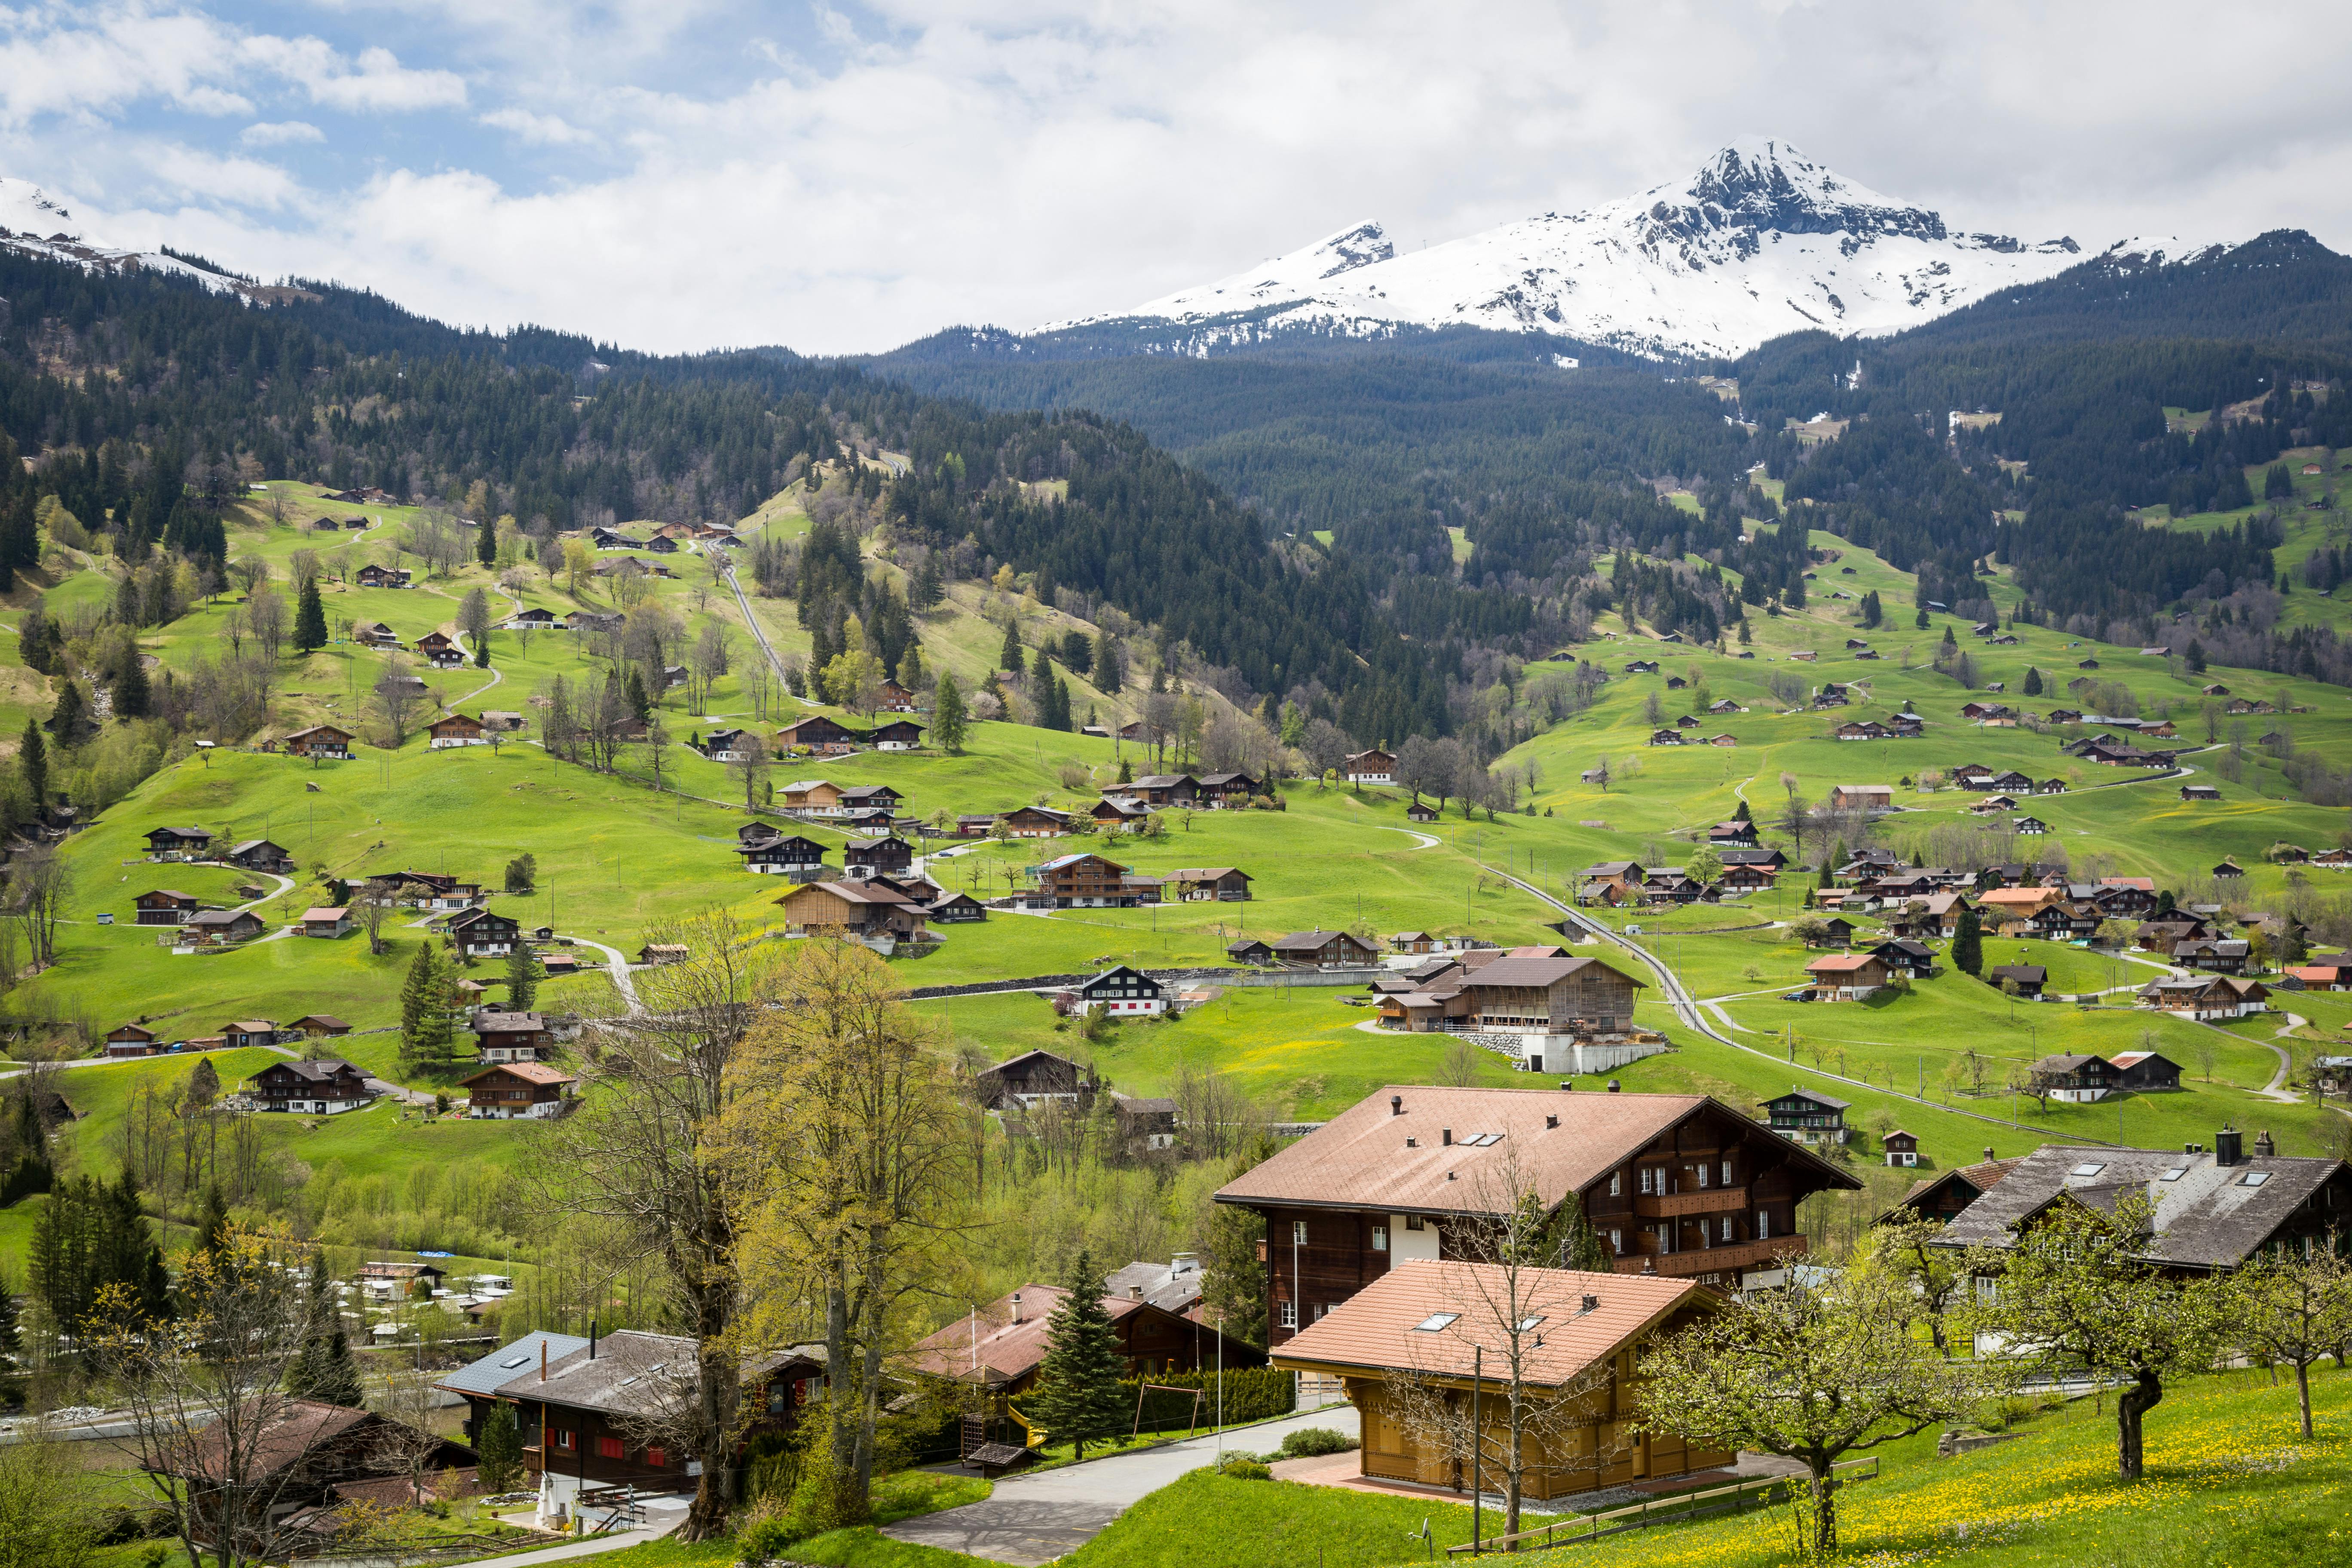 Switzerland on a Budget: Travel Hacks for the Savvy Explorer